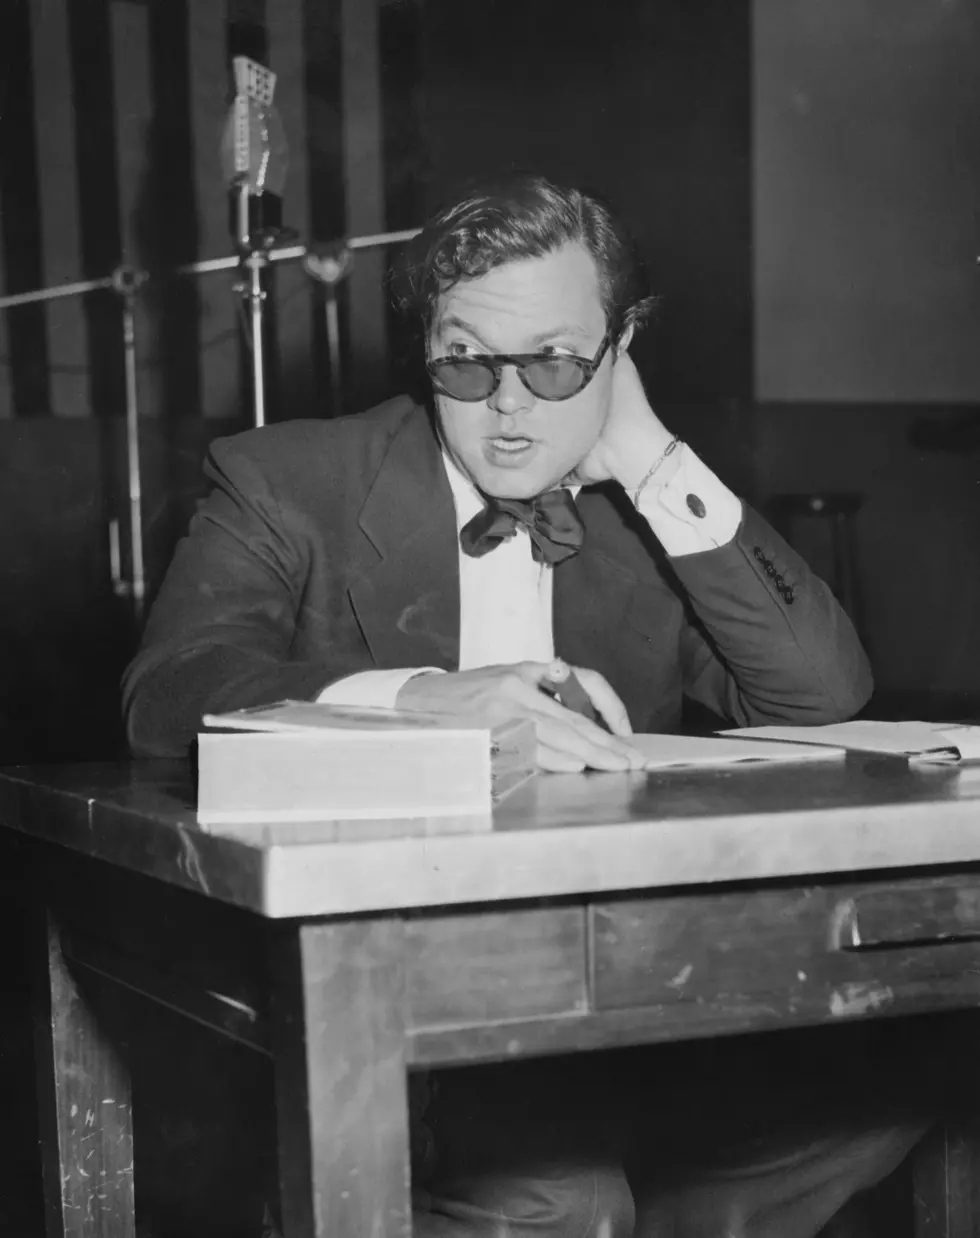 Today In History – “War Of the Worlds” Broadcast causes panic